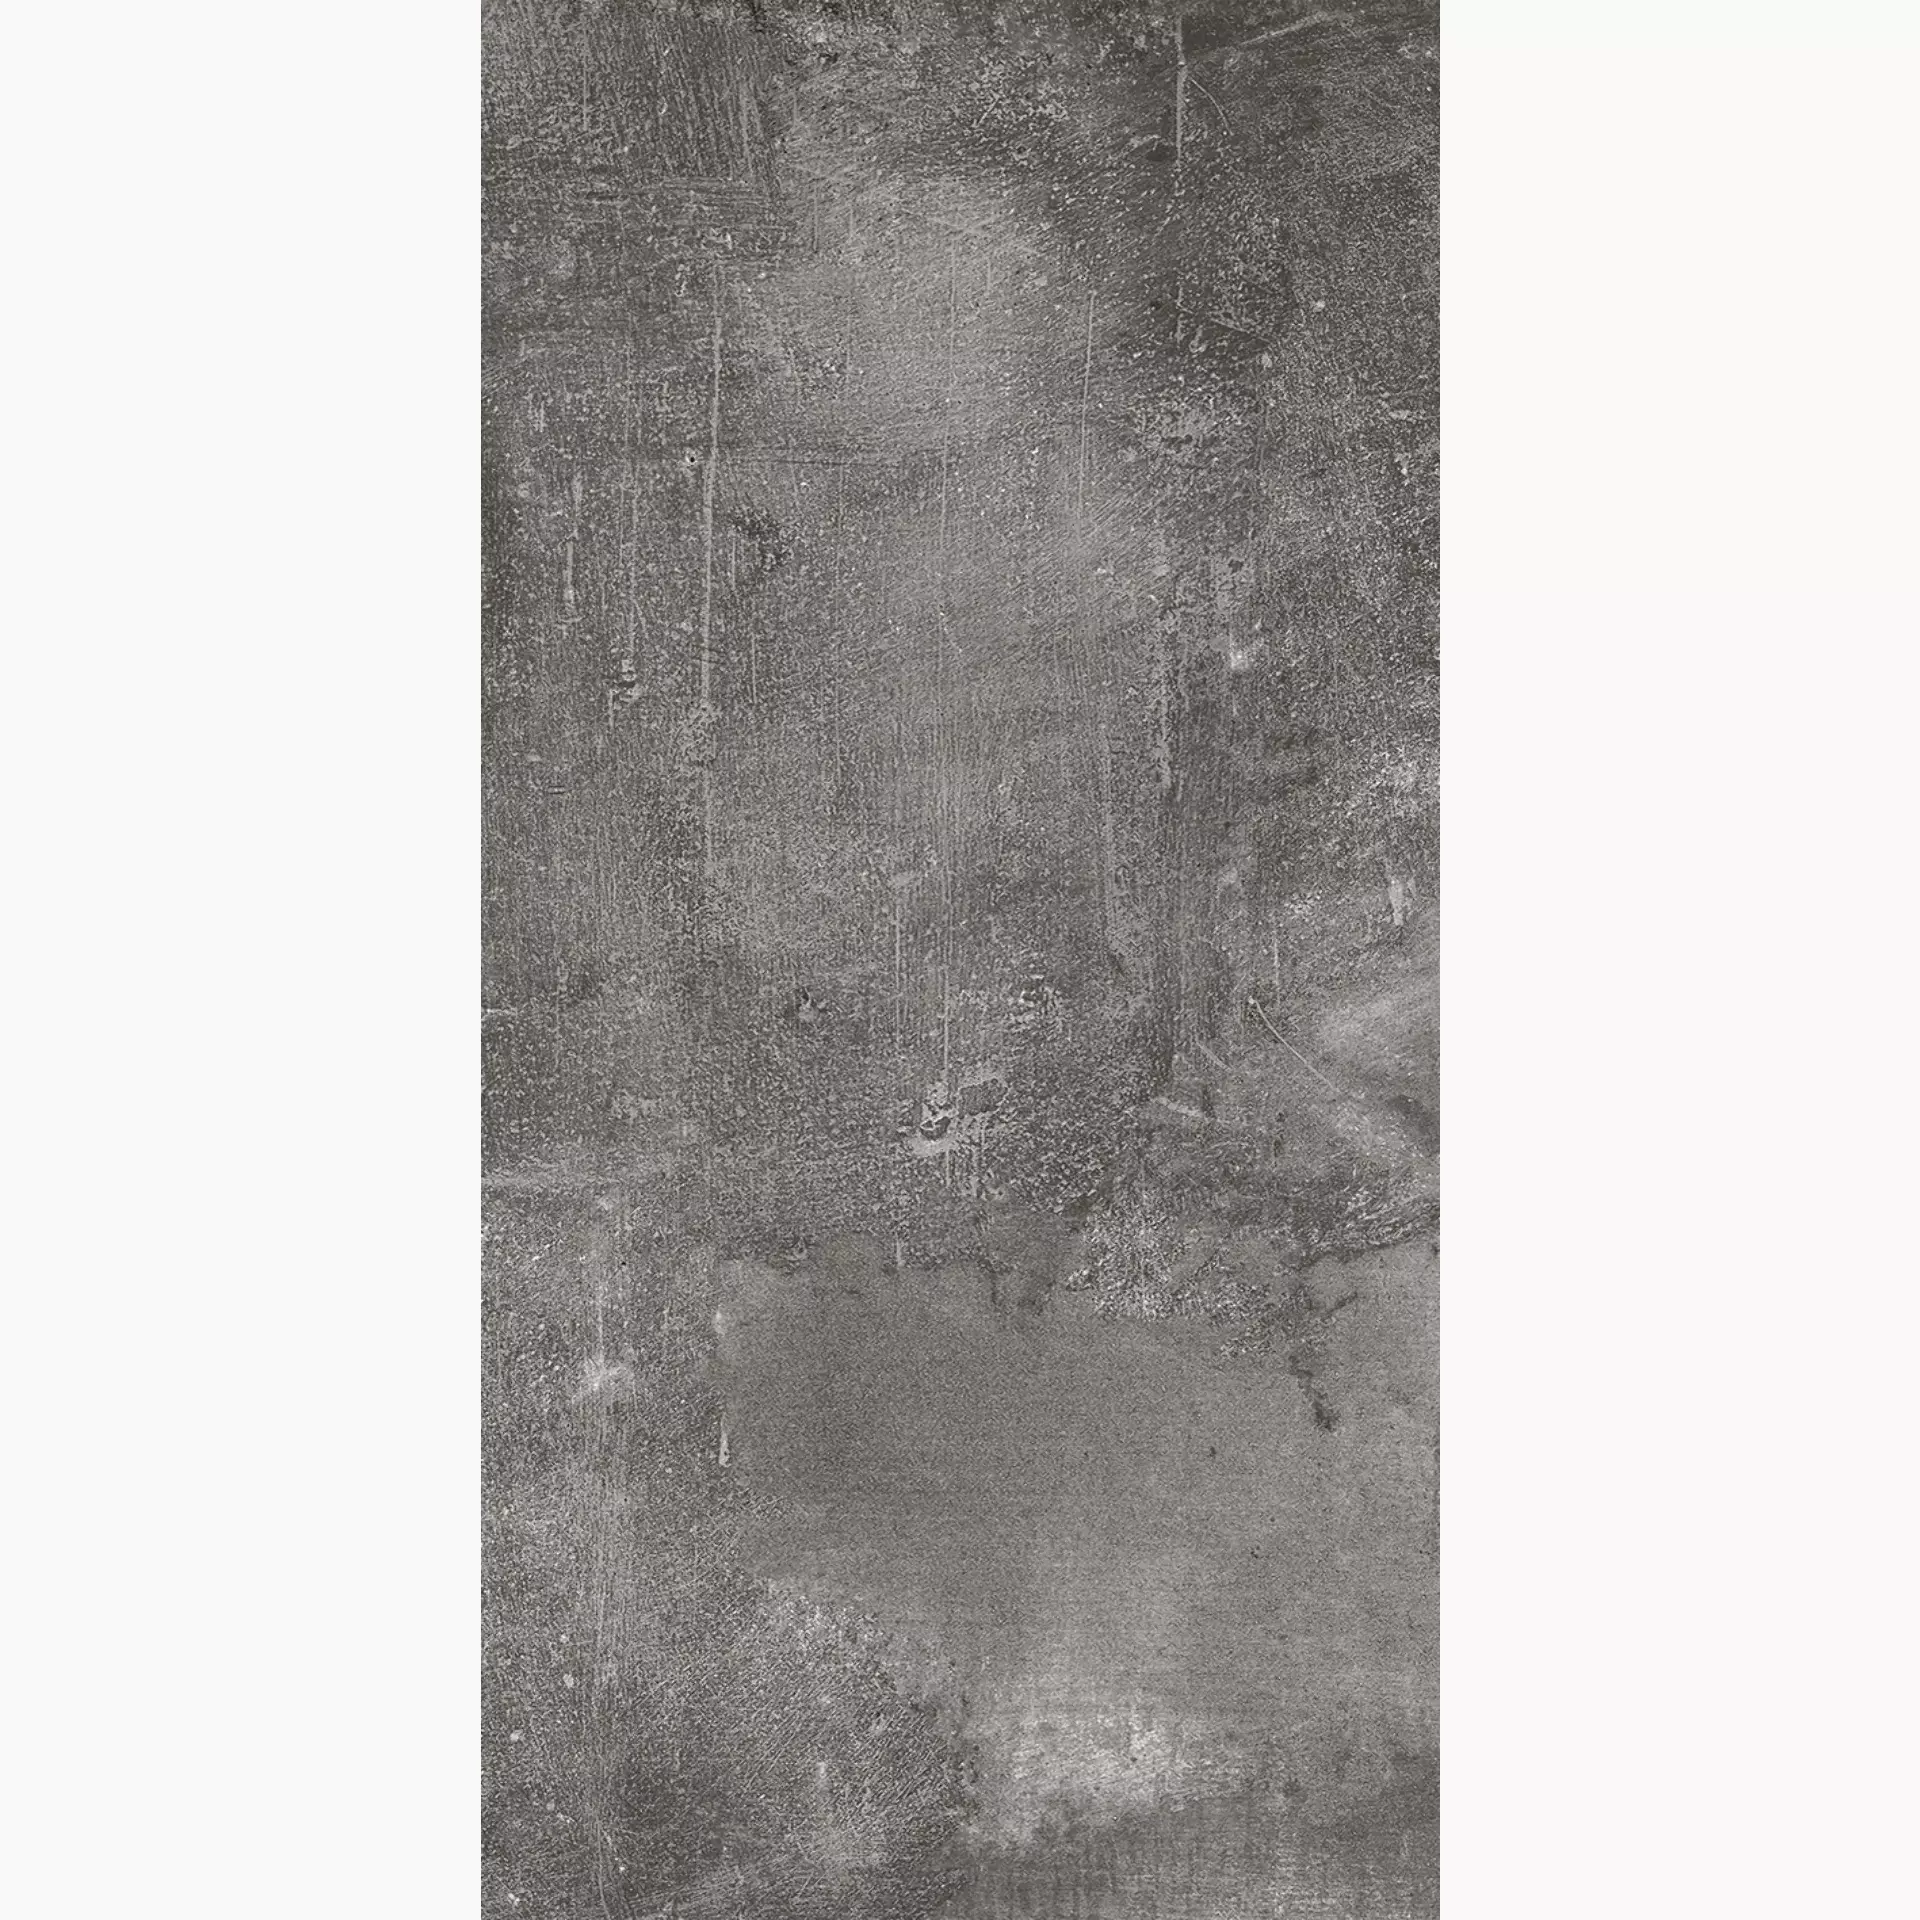 Fondovalle Portland Tabor Natural PTL369 60x120cm rectified 8,5mm